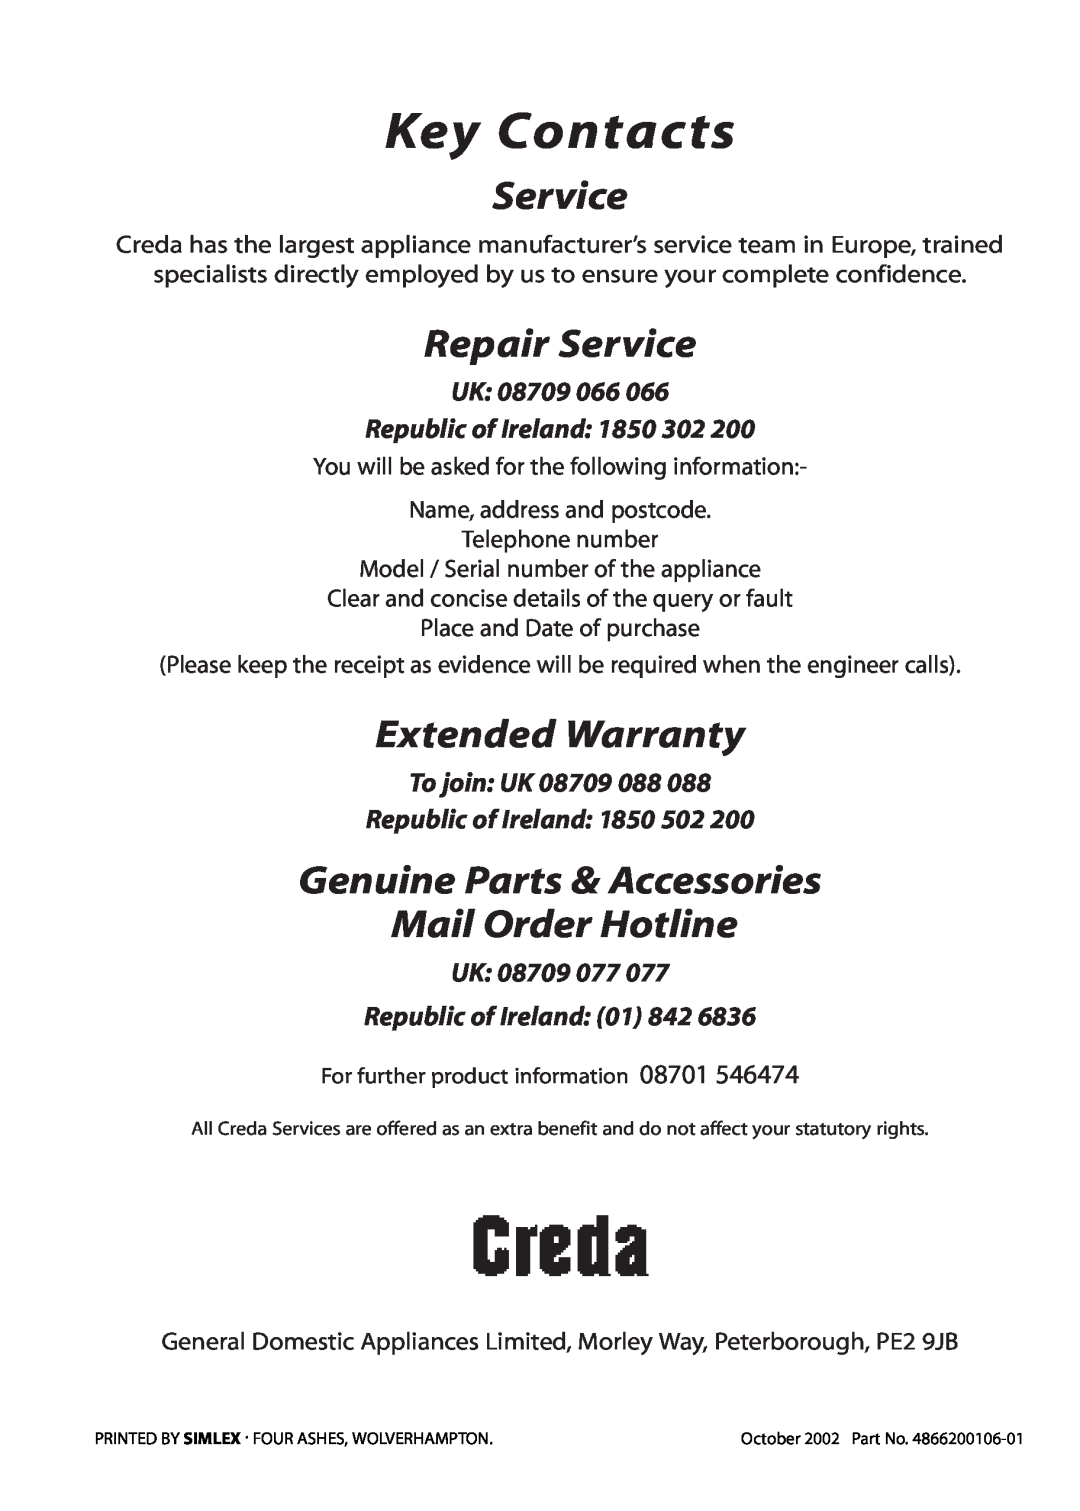 Creda D010E manual Key Contacts, Repair Service, Extended Warranty, Genuine Parts & Accessories Mail Order Hotline 